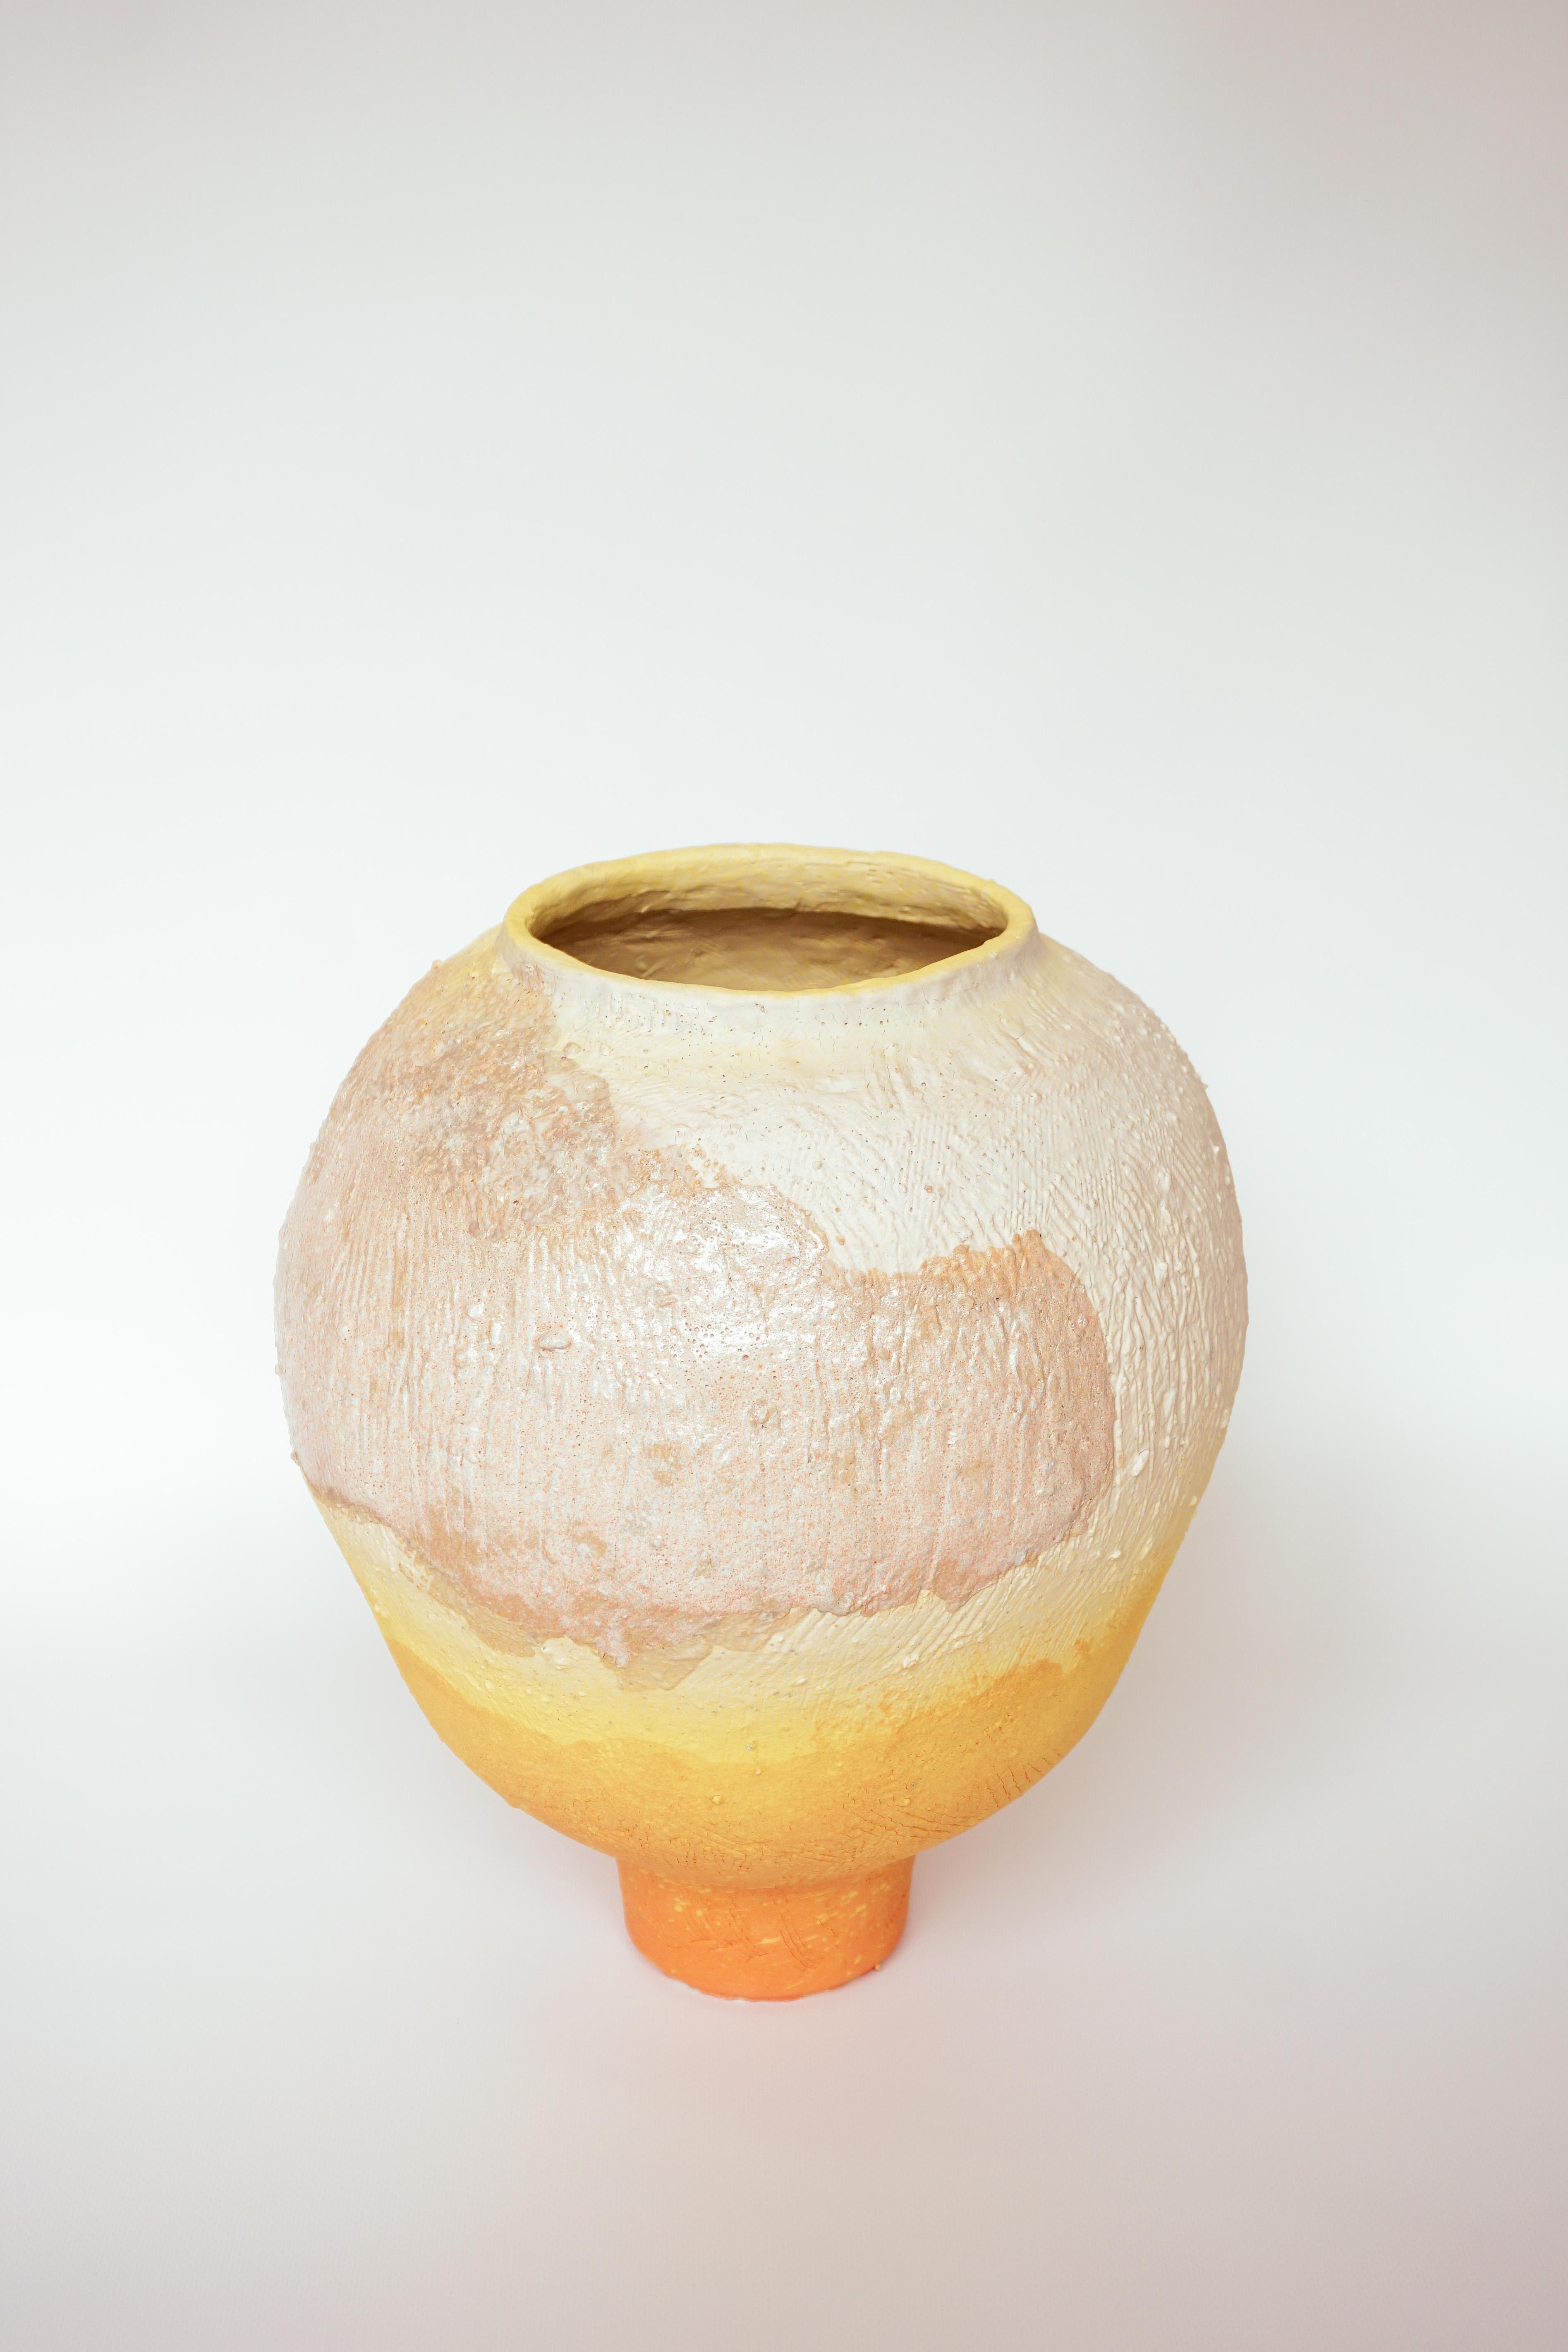 Sunrise vase by Arina Antonova, 2021
Dimensions: H 35 x D 30 cm
Materials: stoneware, glaze, pigment.

Born in Sewastopol (Crimea), I was surrounded by the natural variety of the coastal Black Sea views with rocky beaches and picturesque